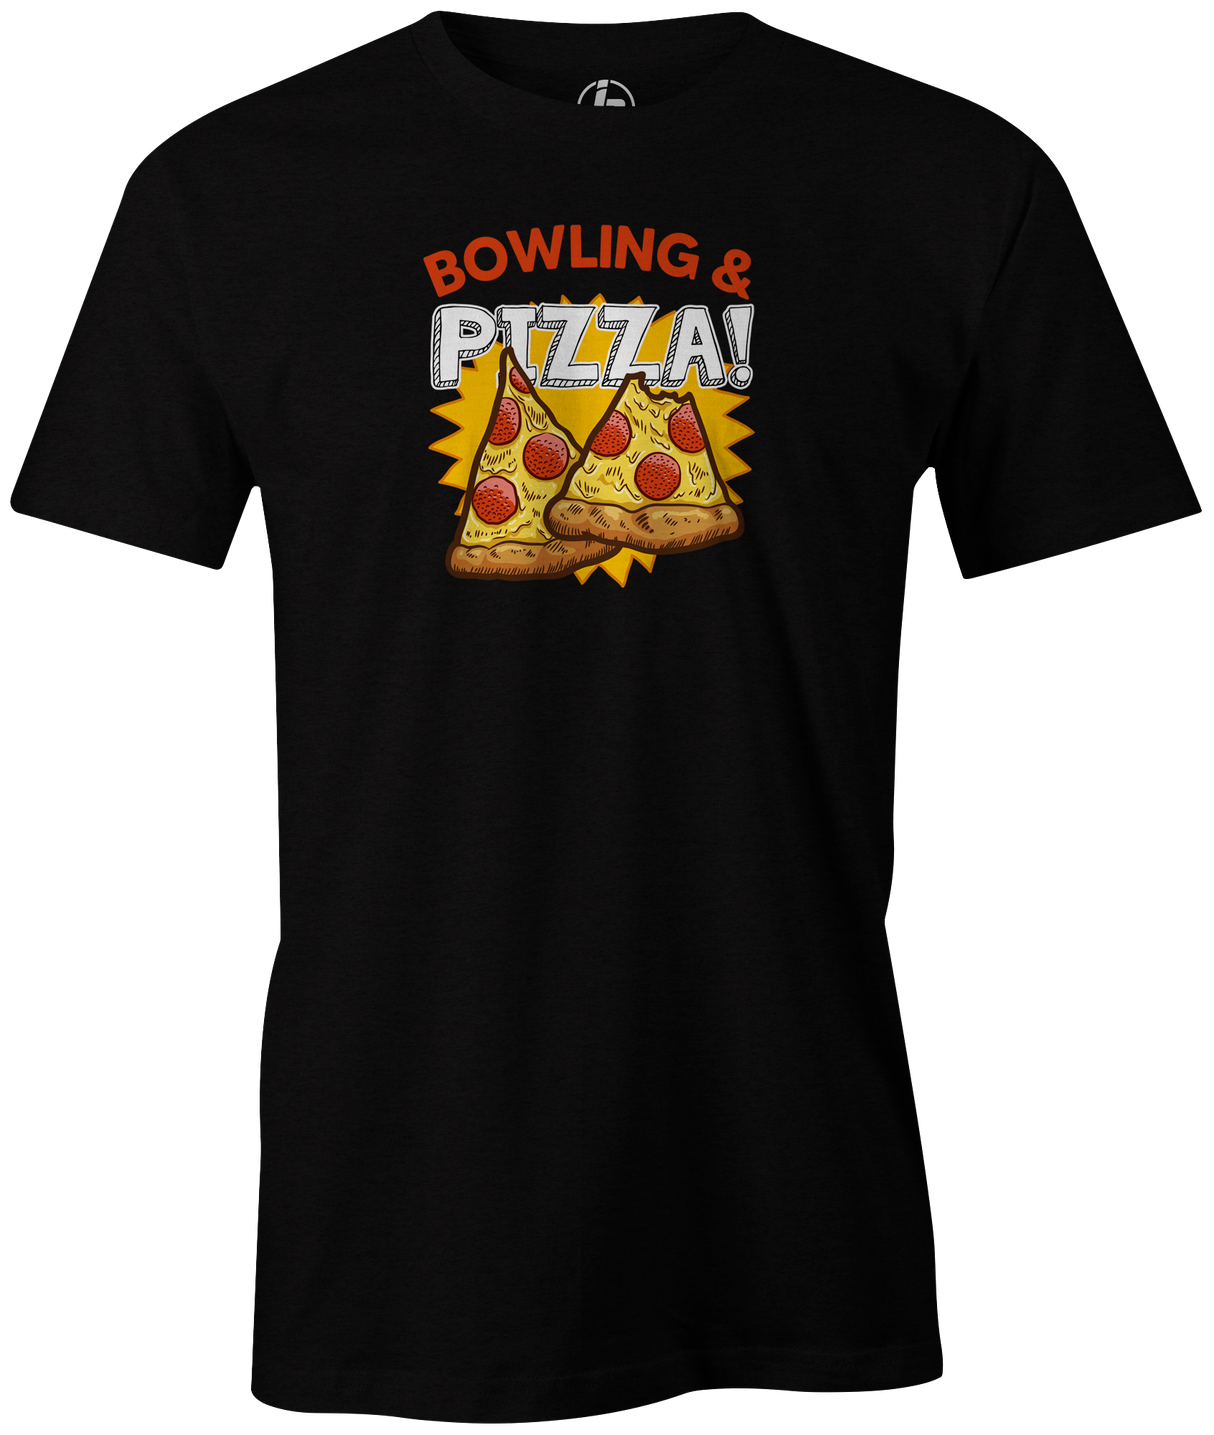 Bowling & Pizza Men's Bowling shirt, black, tee, tee-shirt, tee shirt, apparel, merch, cool, funny, vintage, gift, present, cheap, discount, free shipping, lifestlye, food, snack bar, delicious.